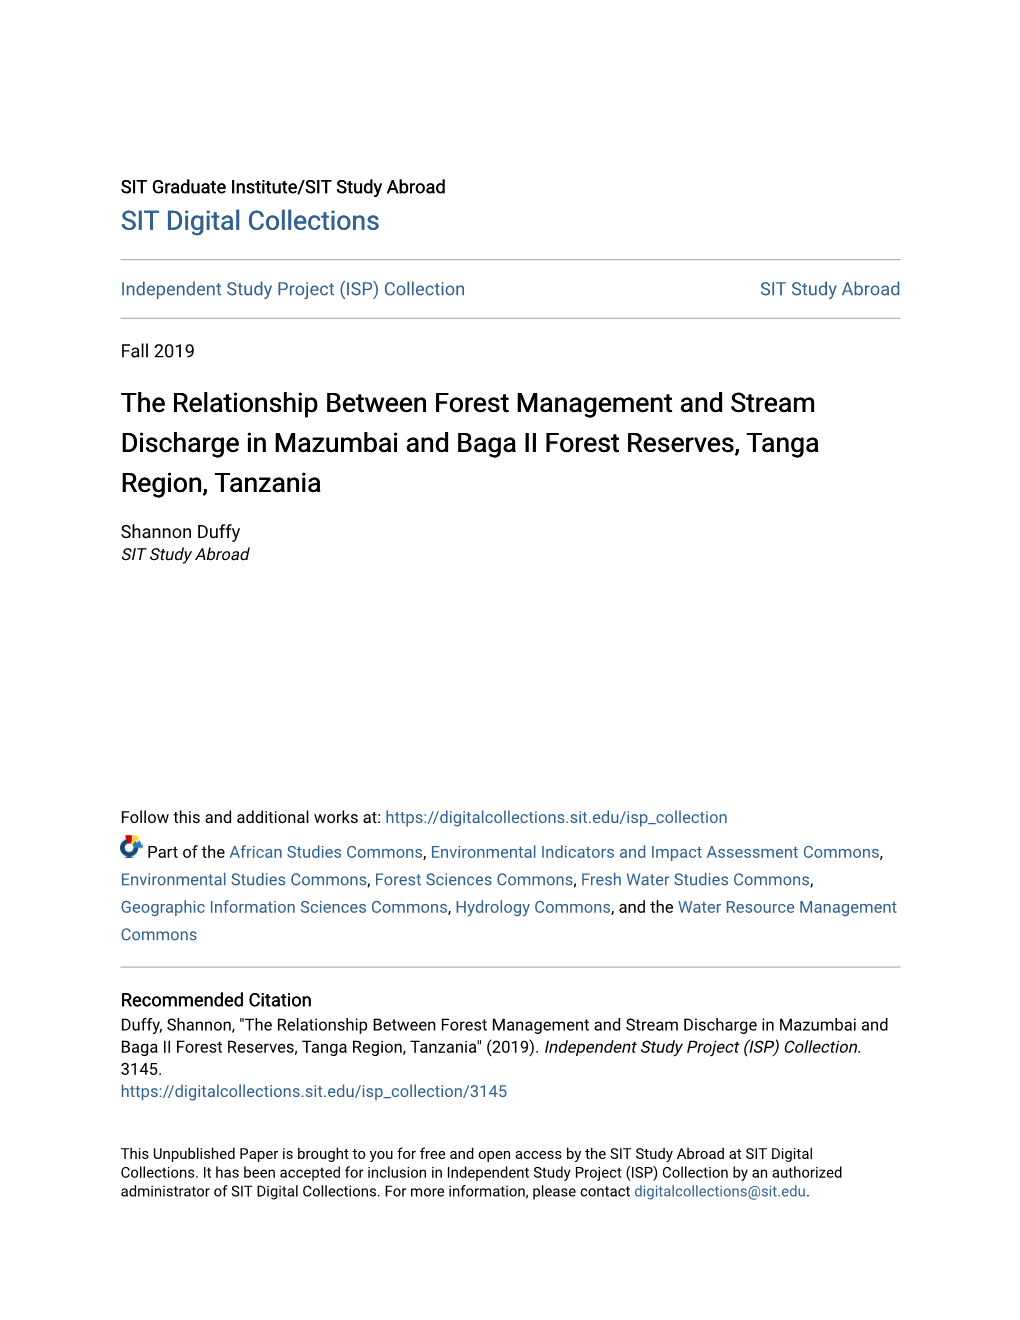 The Relationship Between Forest Management and Stream Discharge in Mazumbai and Baga II Forest Reserves, Tanga Region, Tanzania